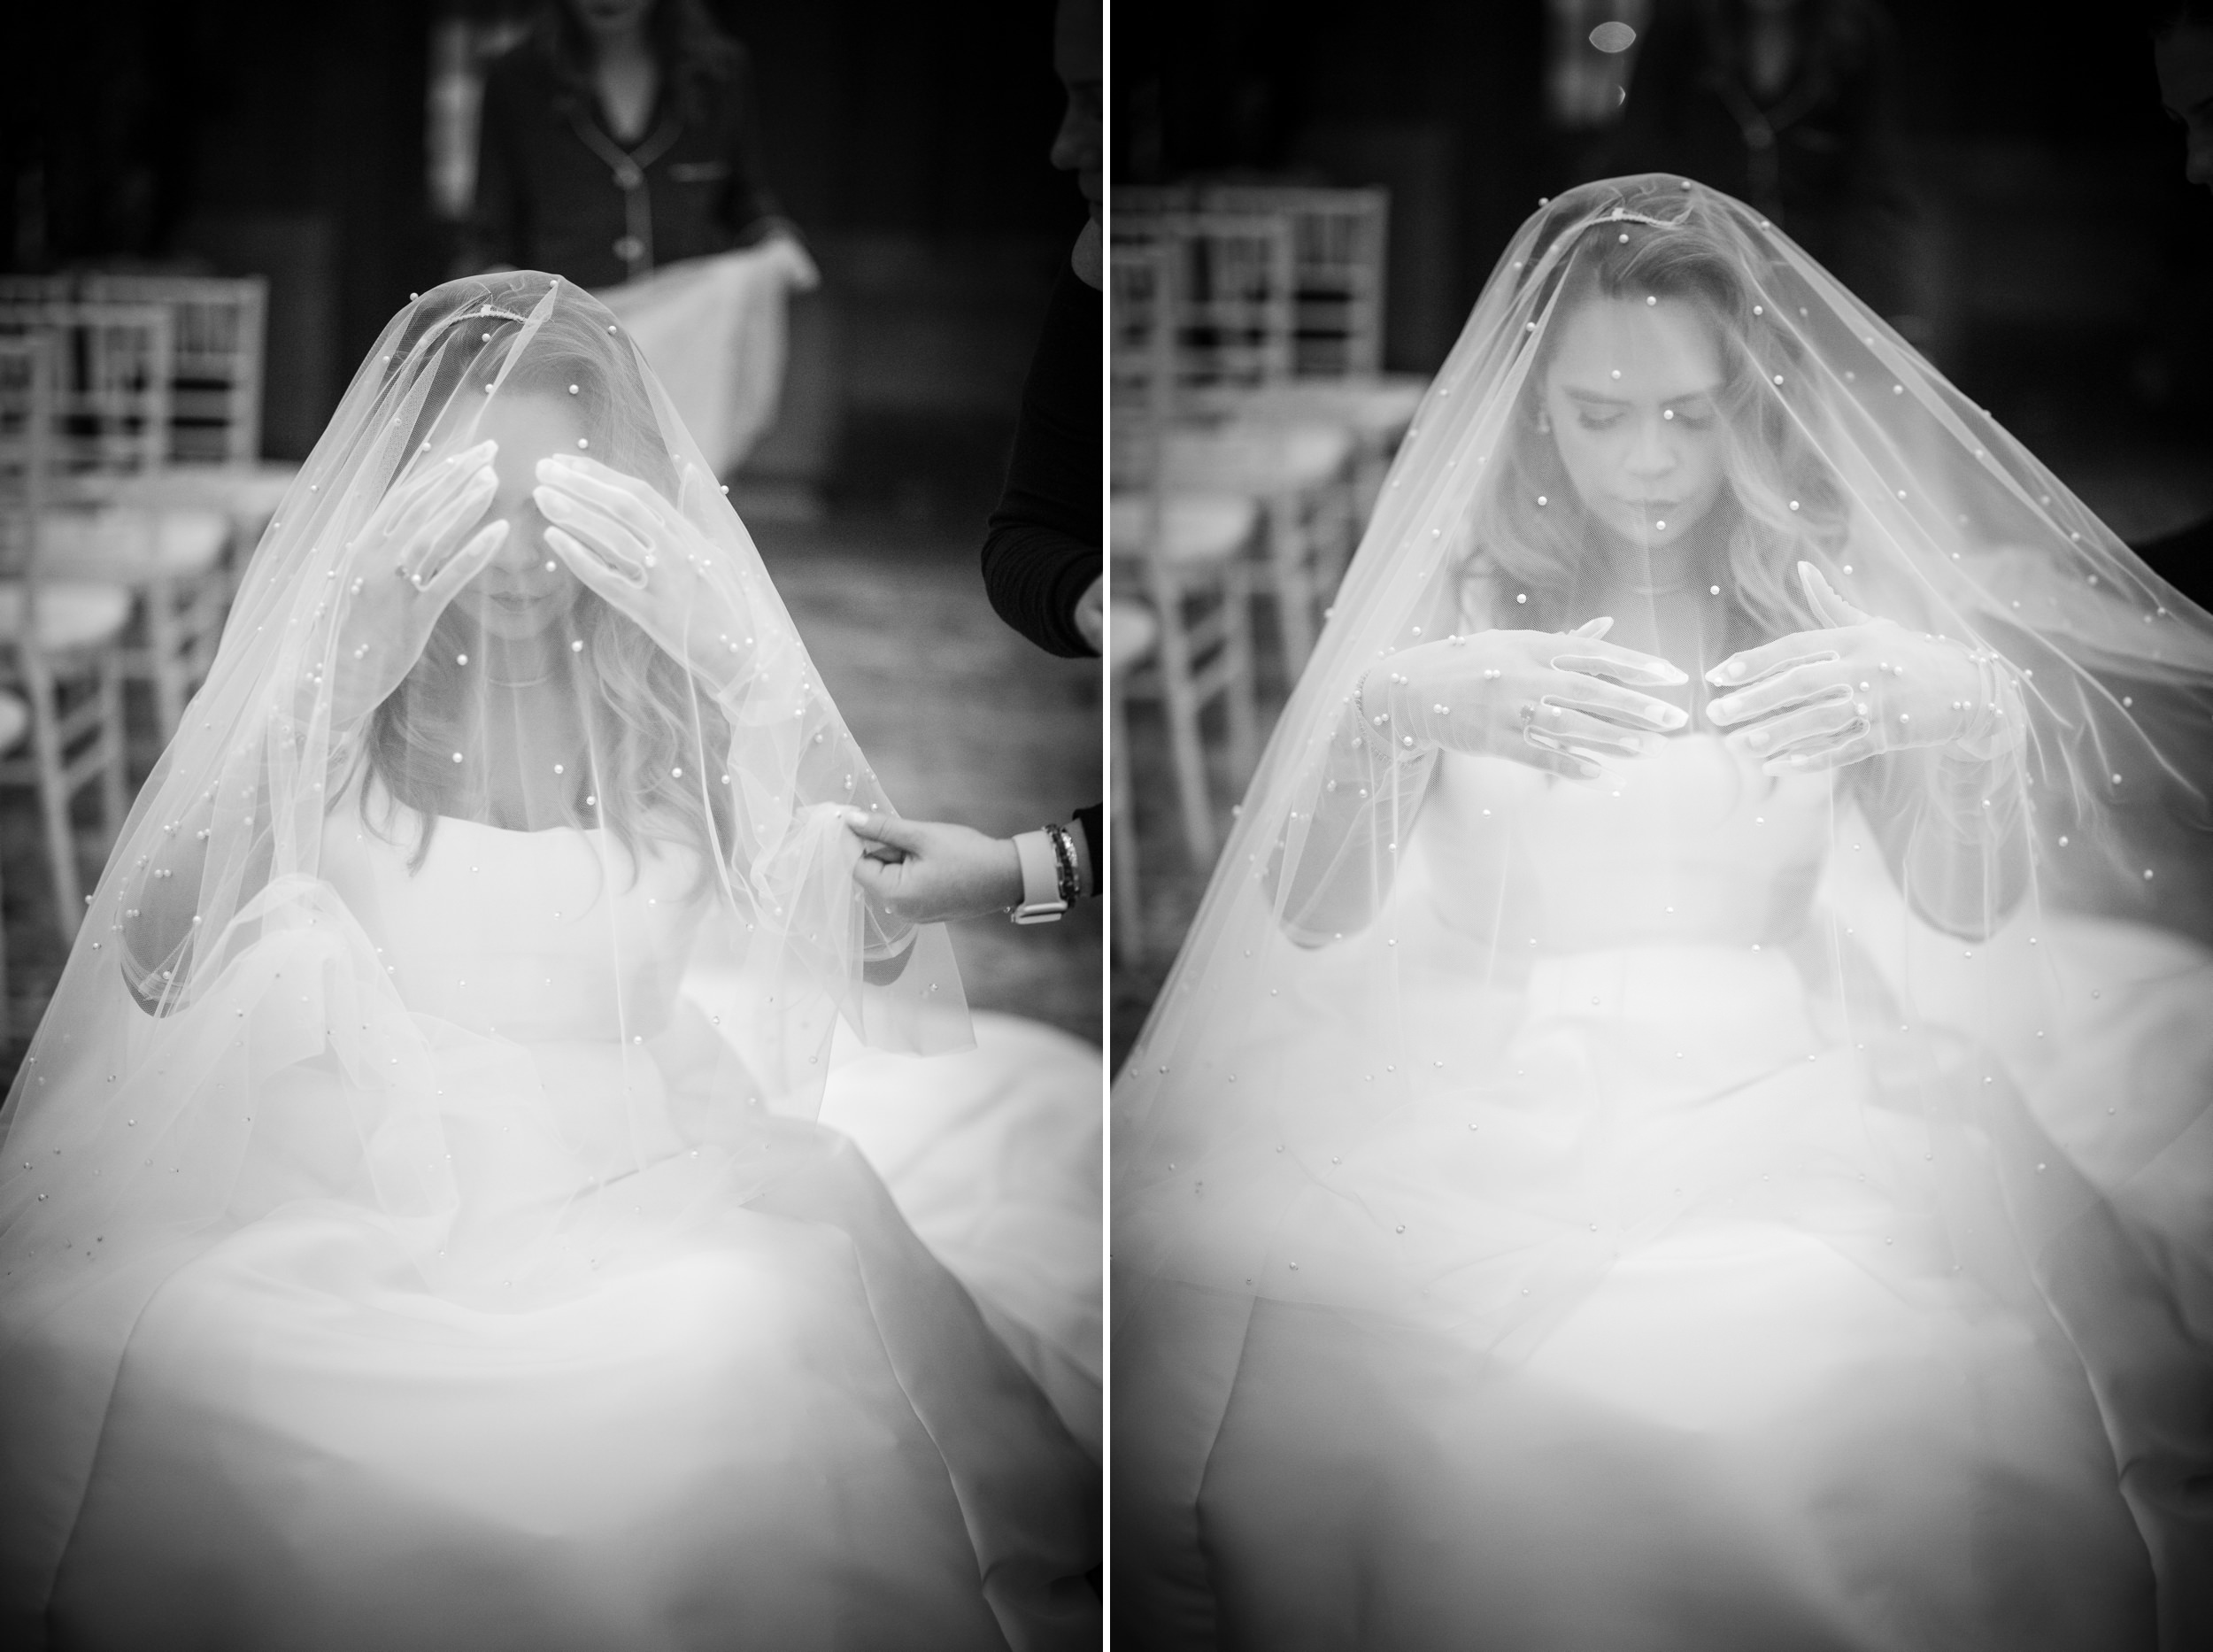 Bride putting on veil at a Beekman Hotel wedding in NYC